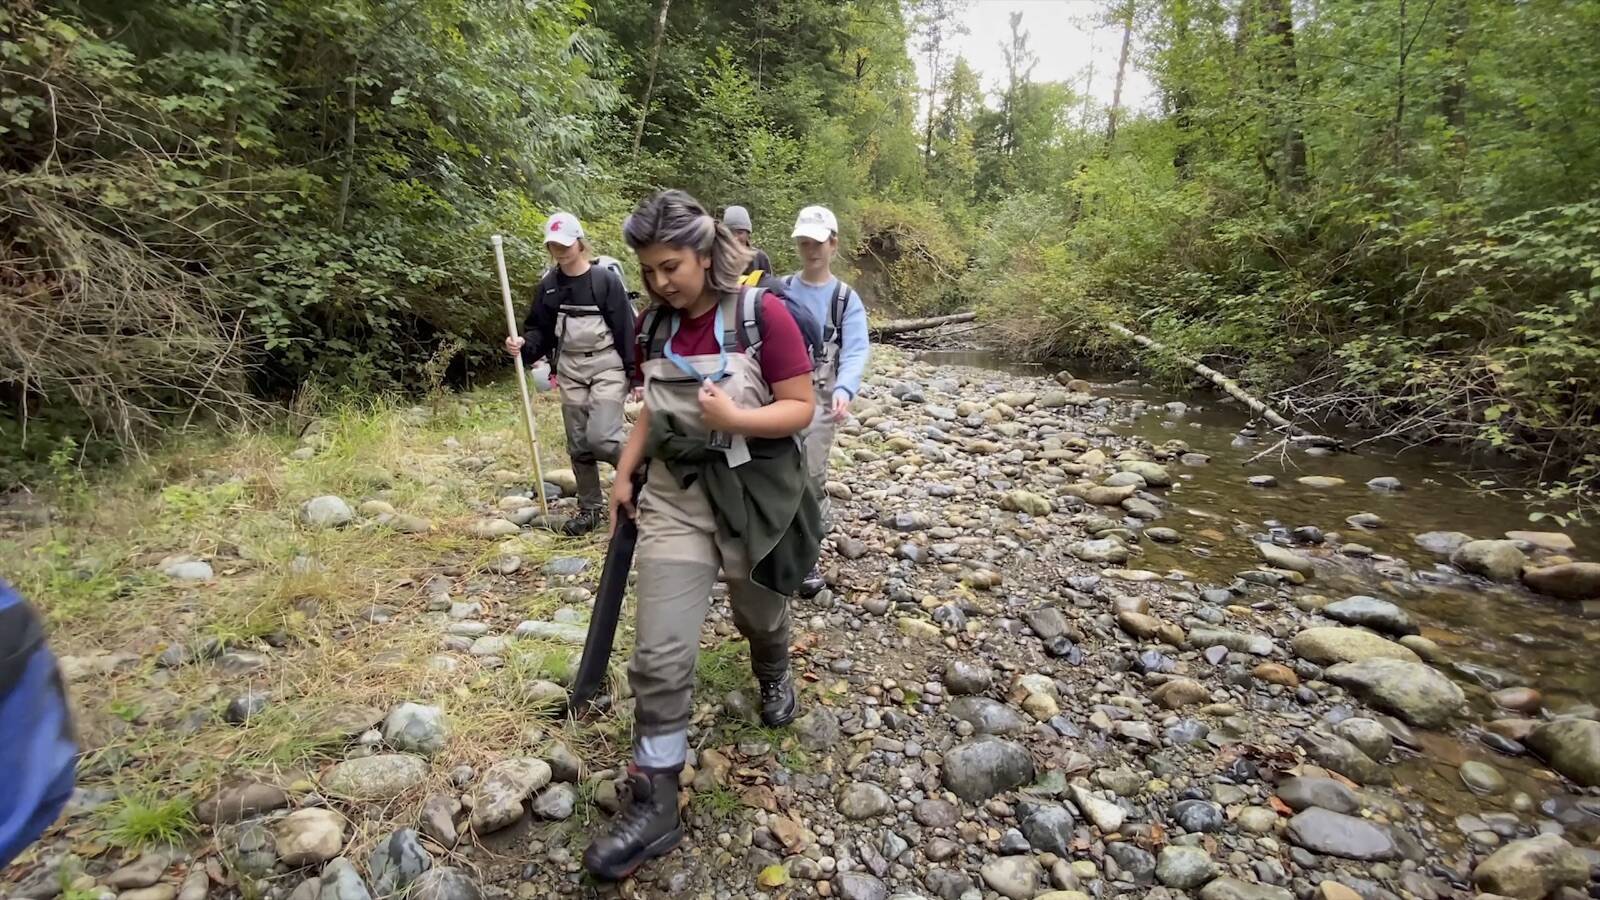 Stream Team environmental aides on their way to study a stream’s health. Screenshot taken from King County Department of Natural Resources and Parks